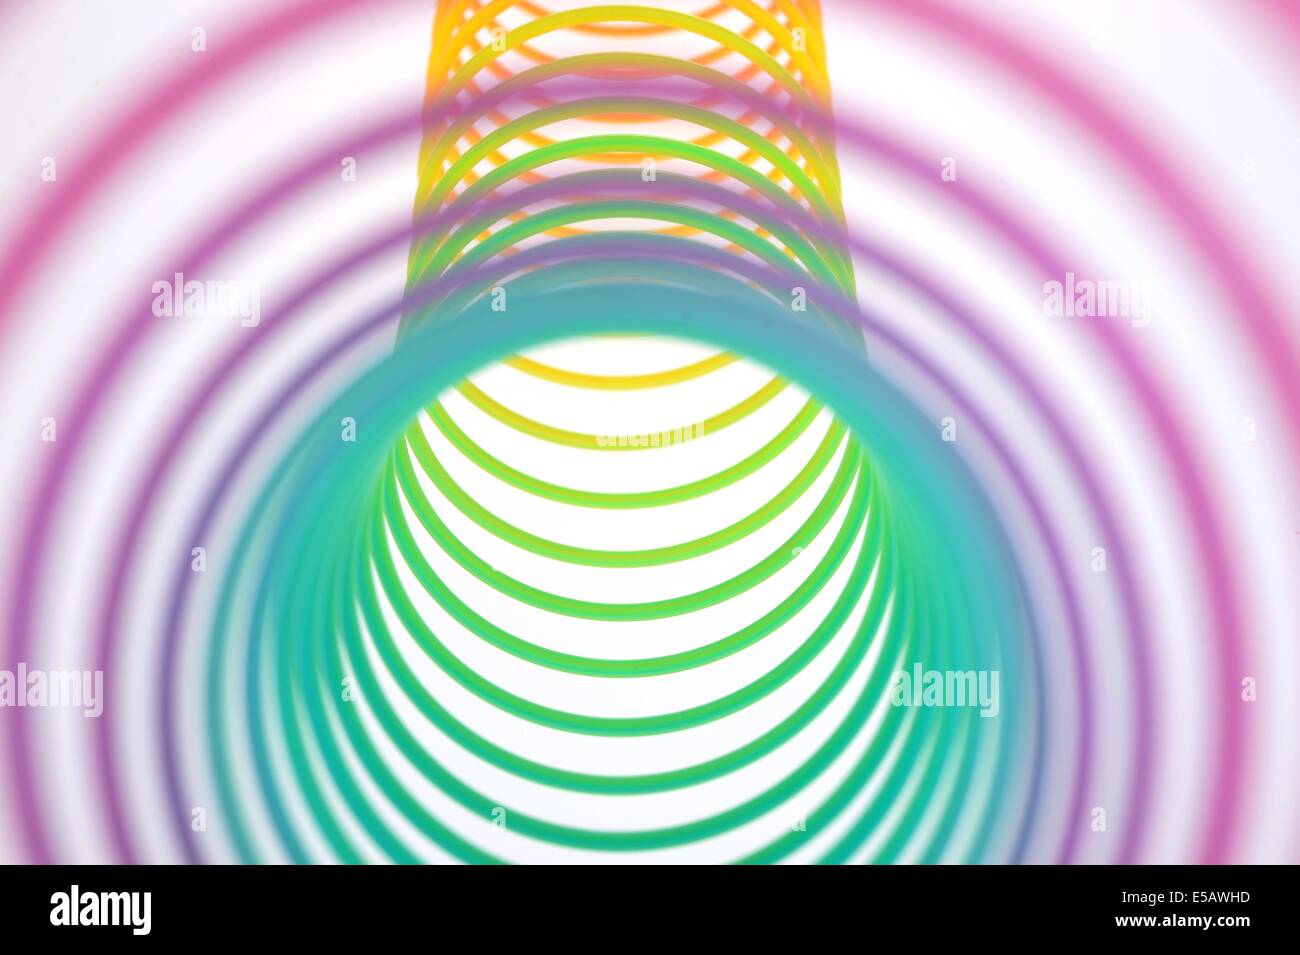 A close up shot of a slinky toy Stock Photo